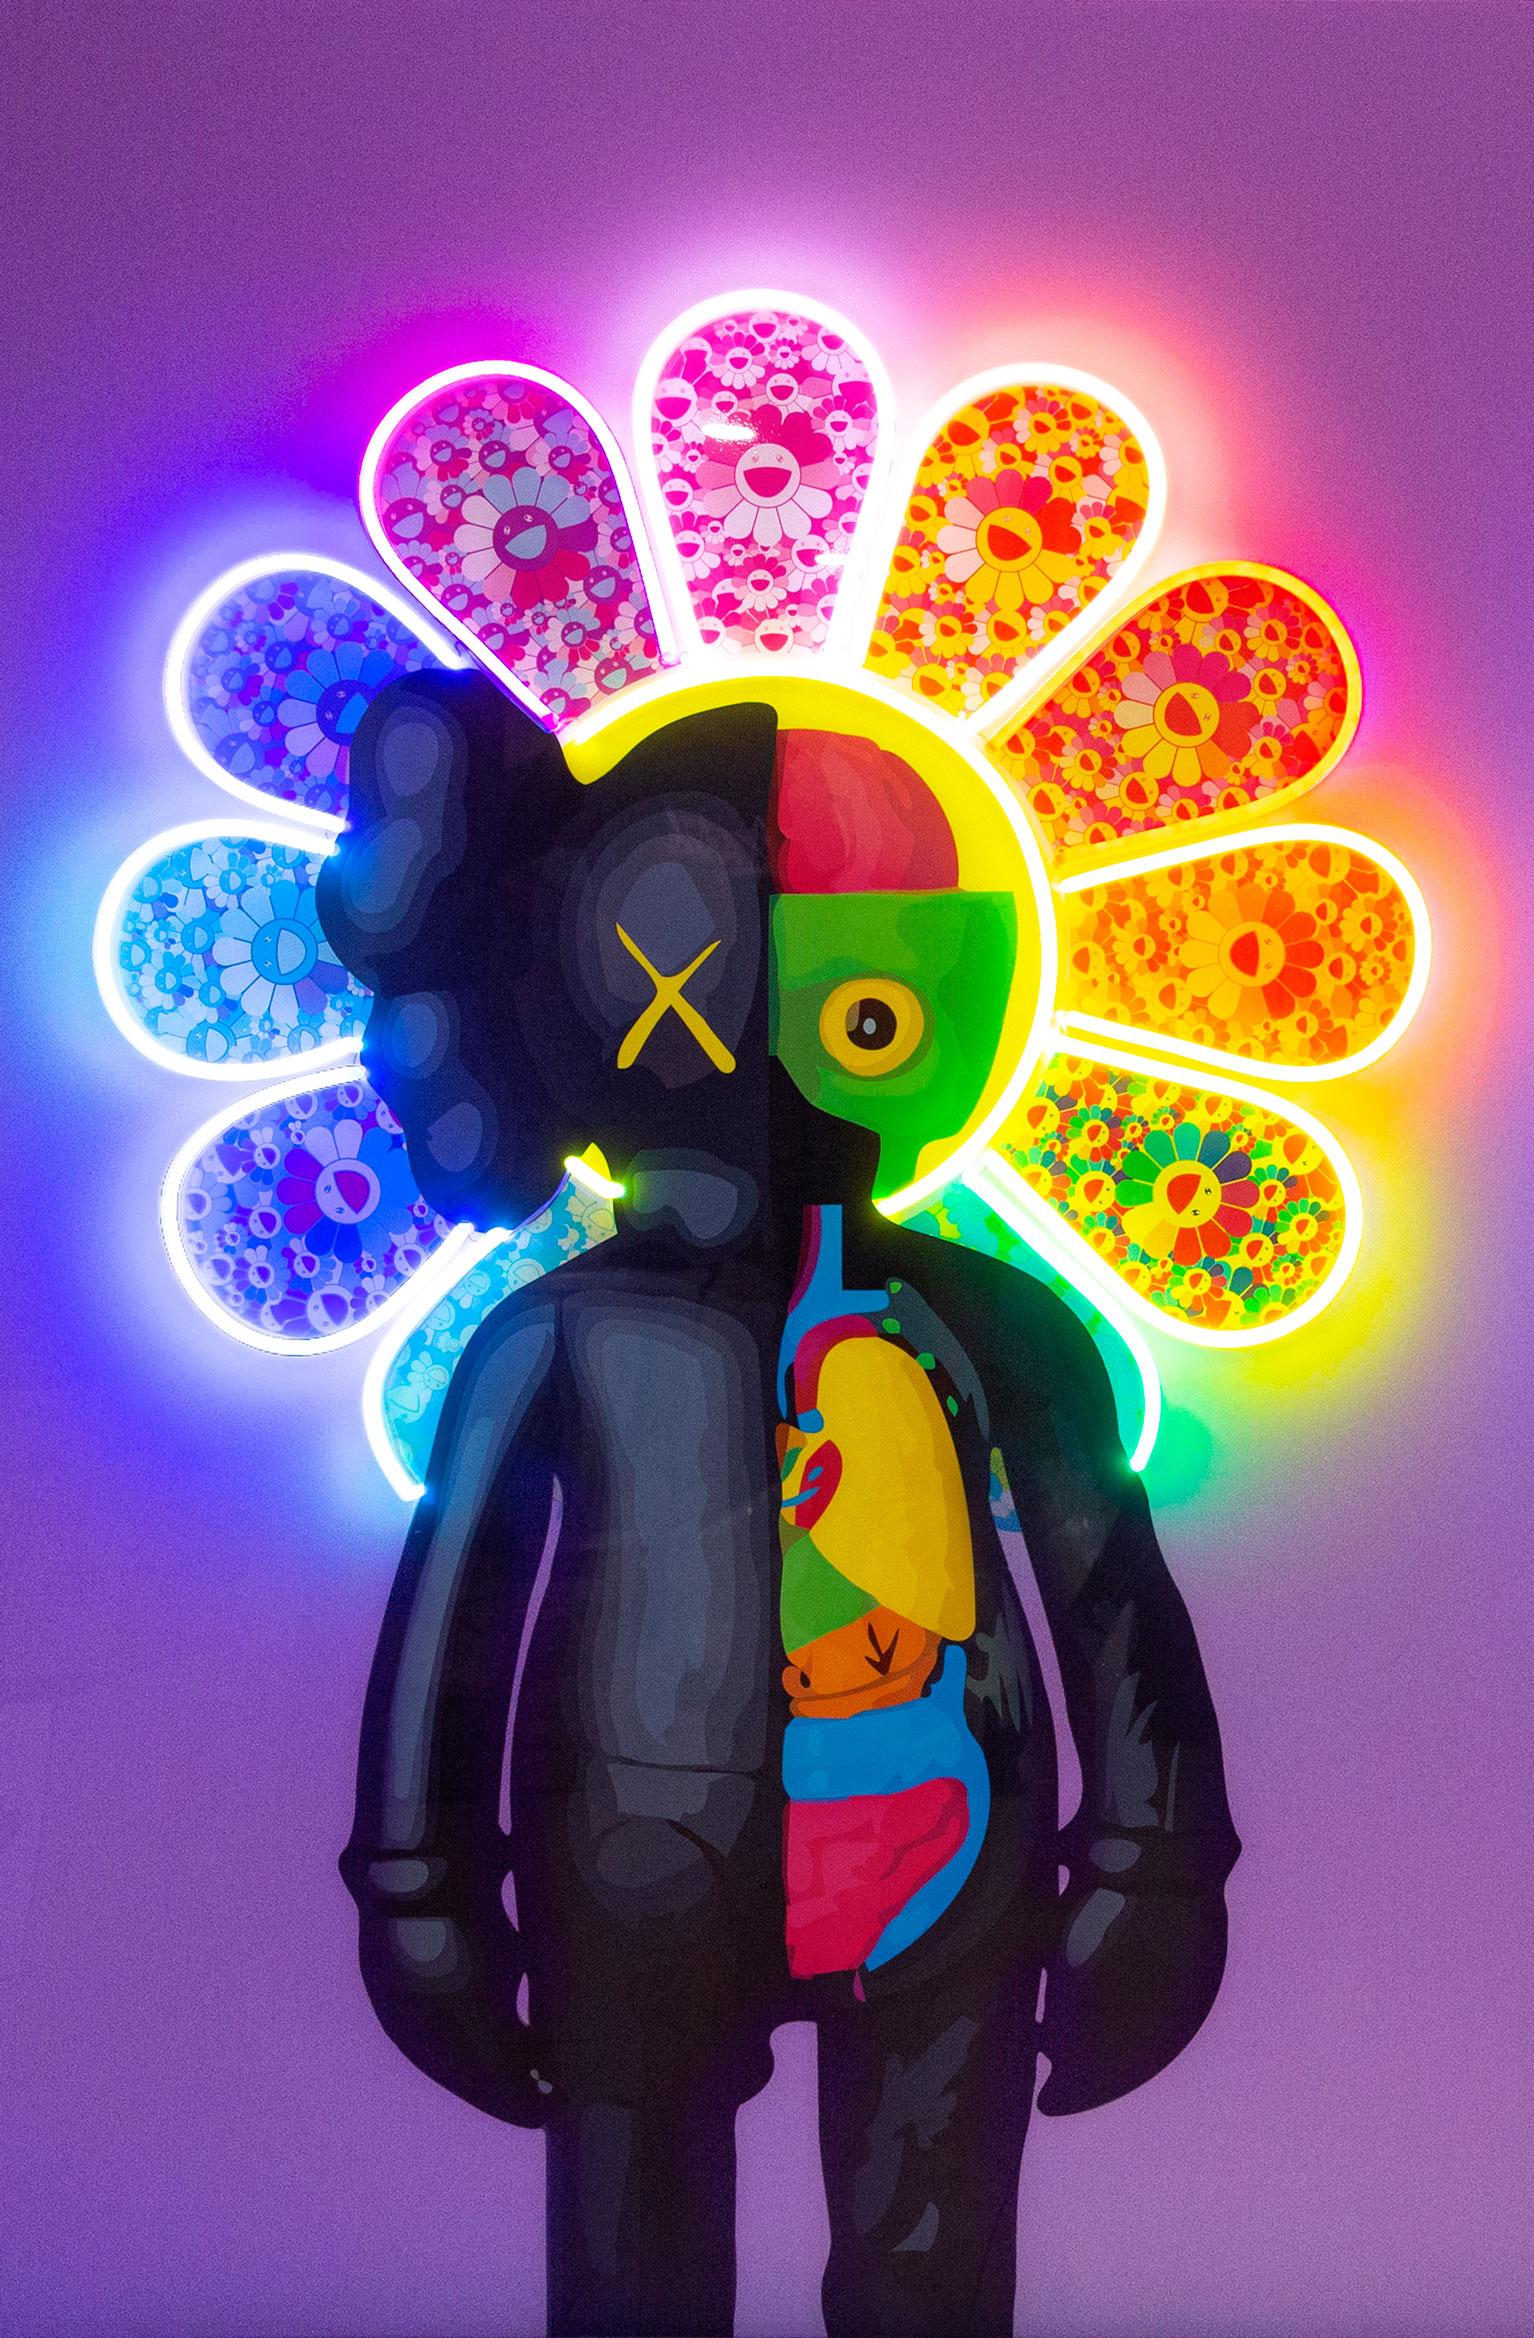 This mash-up artwork was created in hommage to two of Cedric’s favourite artists, KAWS & Takashi Murakami.

All available sizes and editions:
36" x 24"", Edition of 10, Artist Proofs 3 
72" x 48"", Edition of 10, Artist Proofs 3 
80 x 54" , Edition